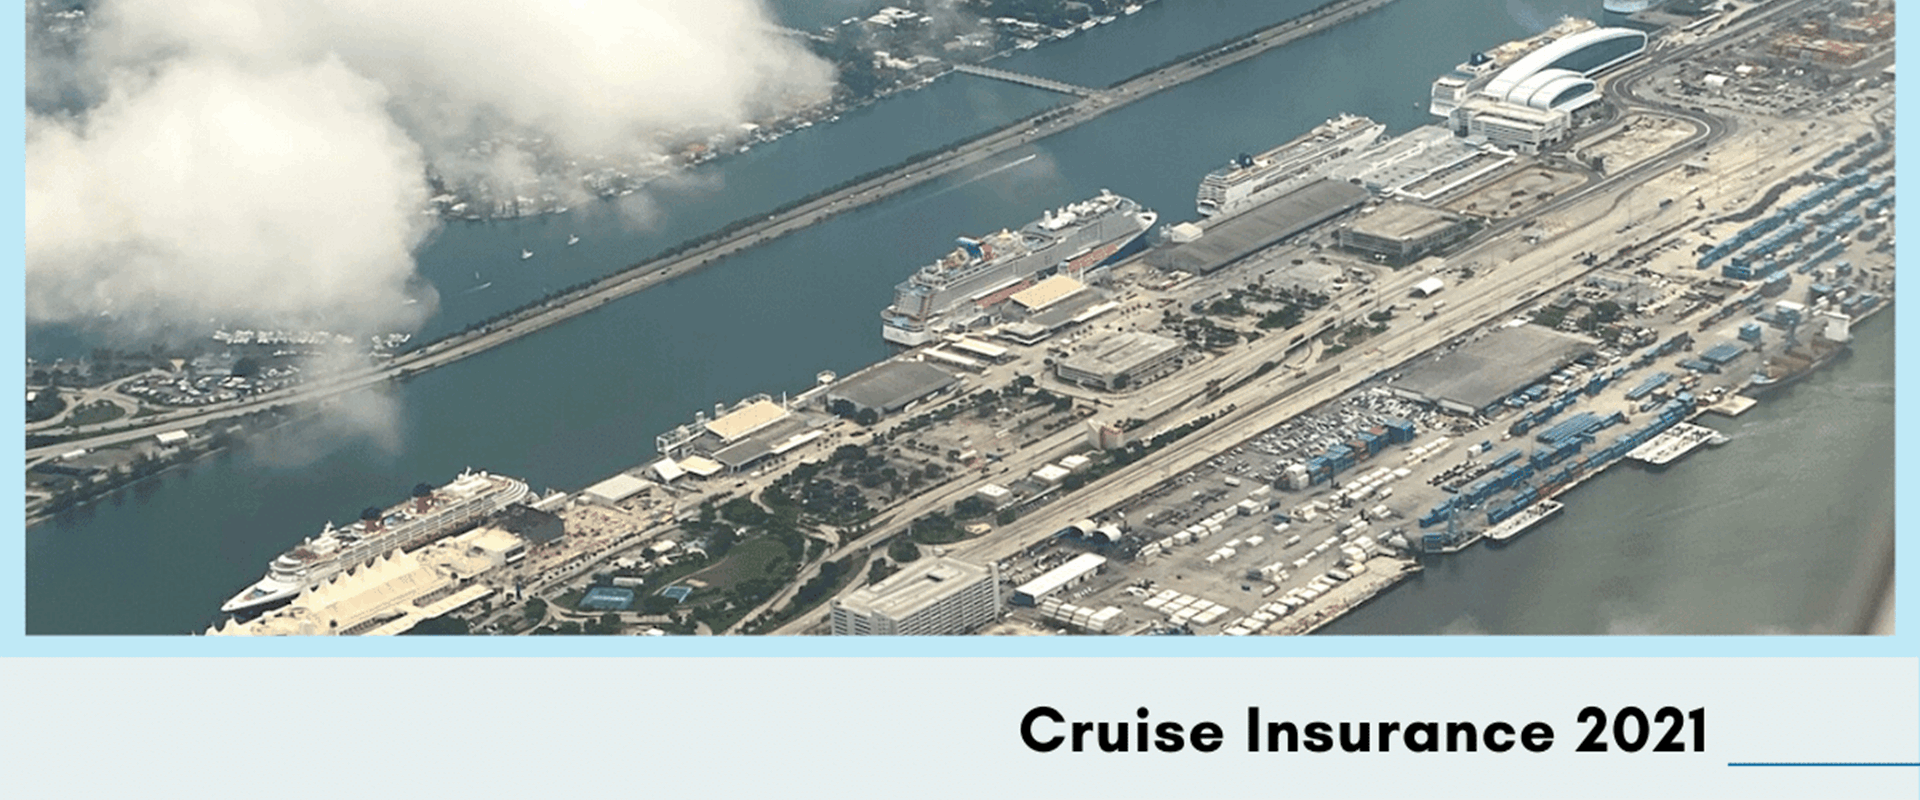 Cruise Insurance Is Necessary In 2021